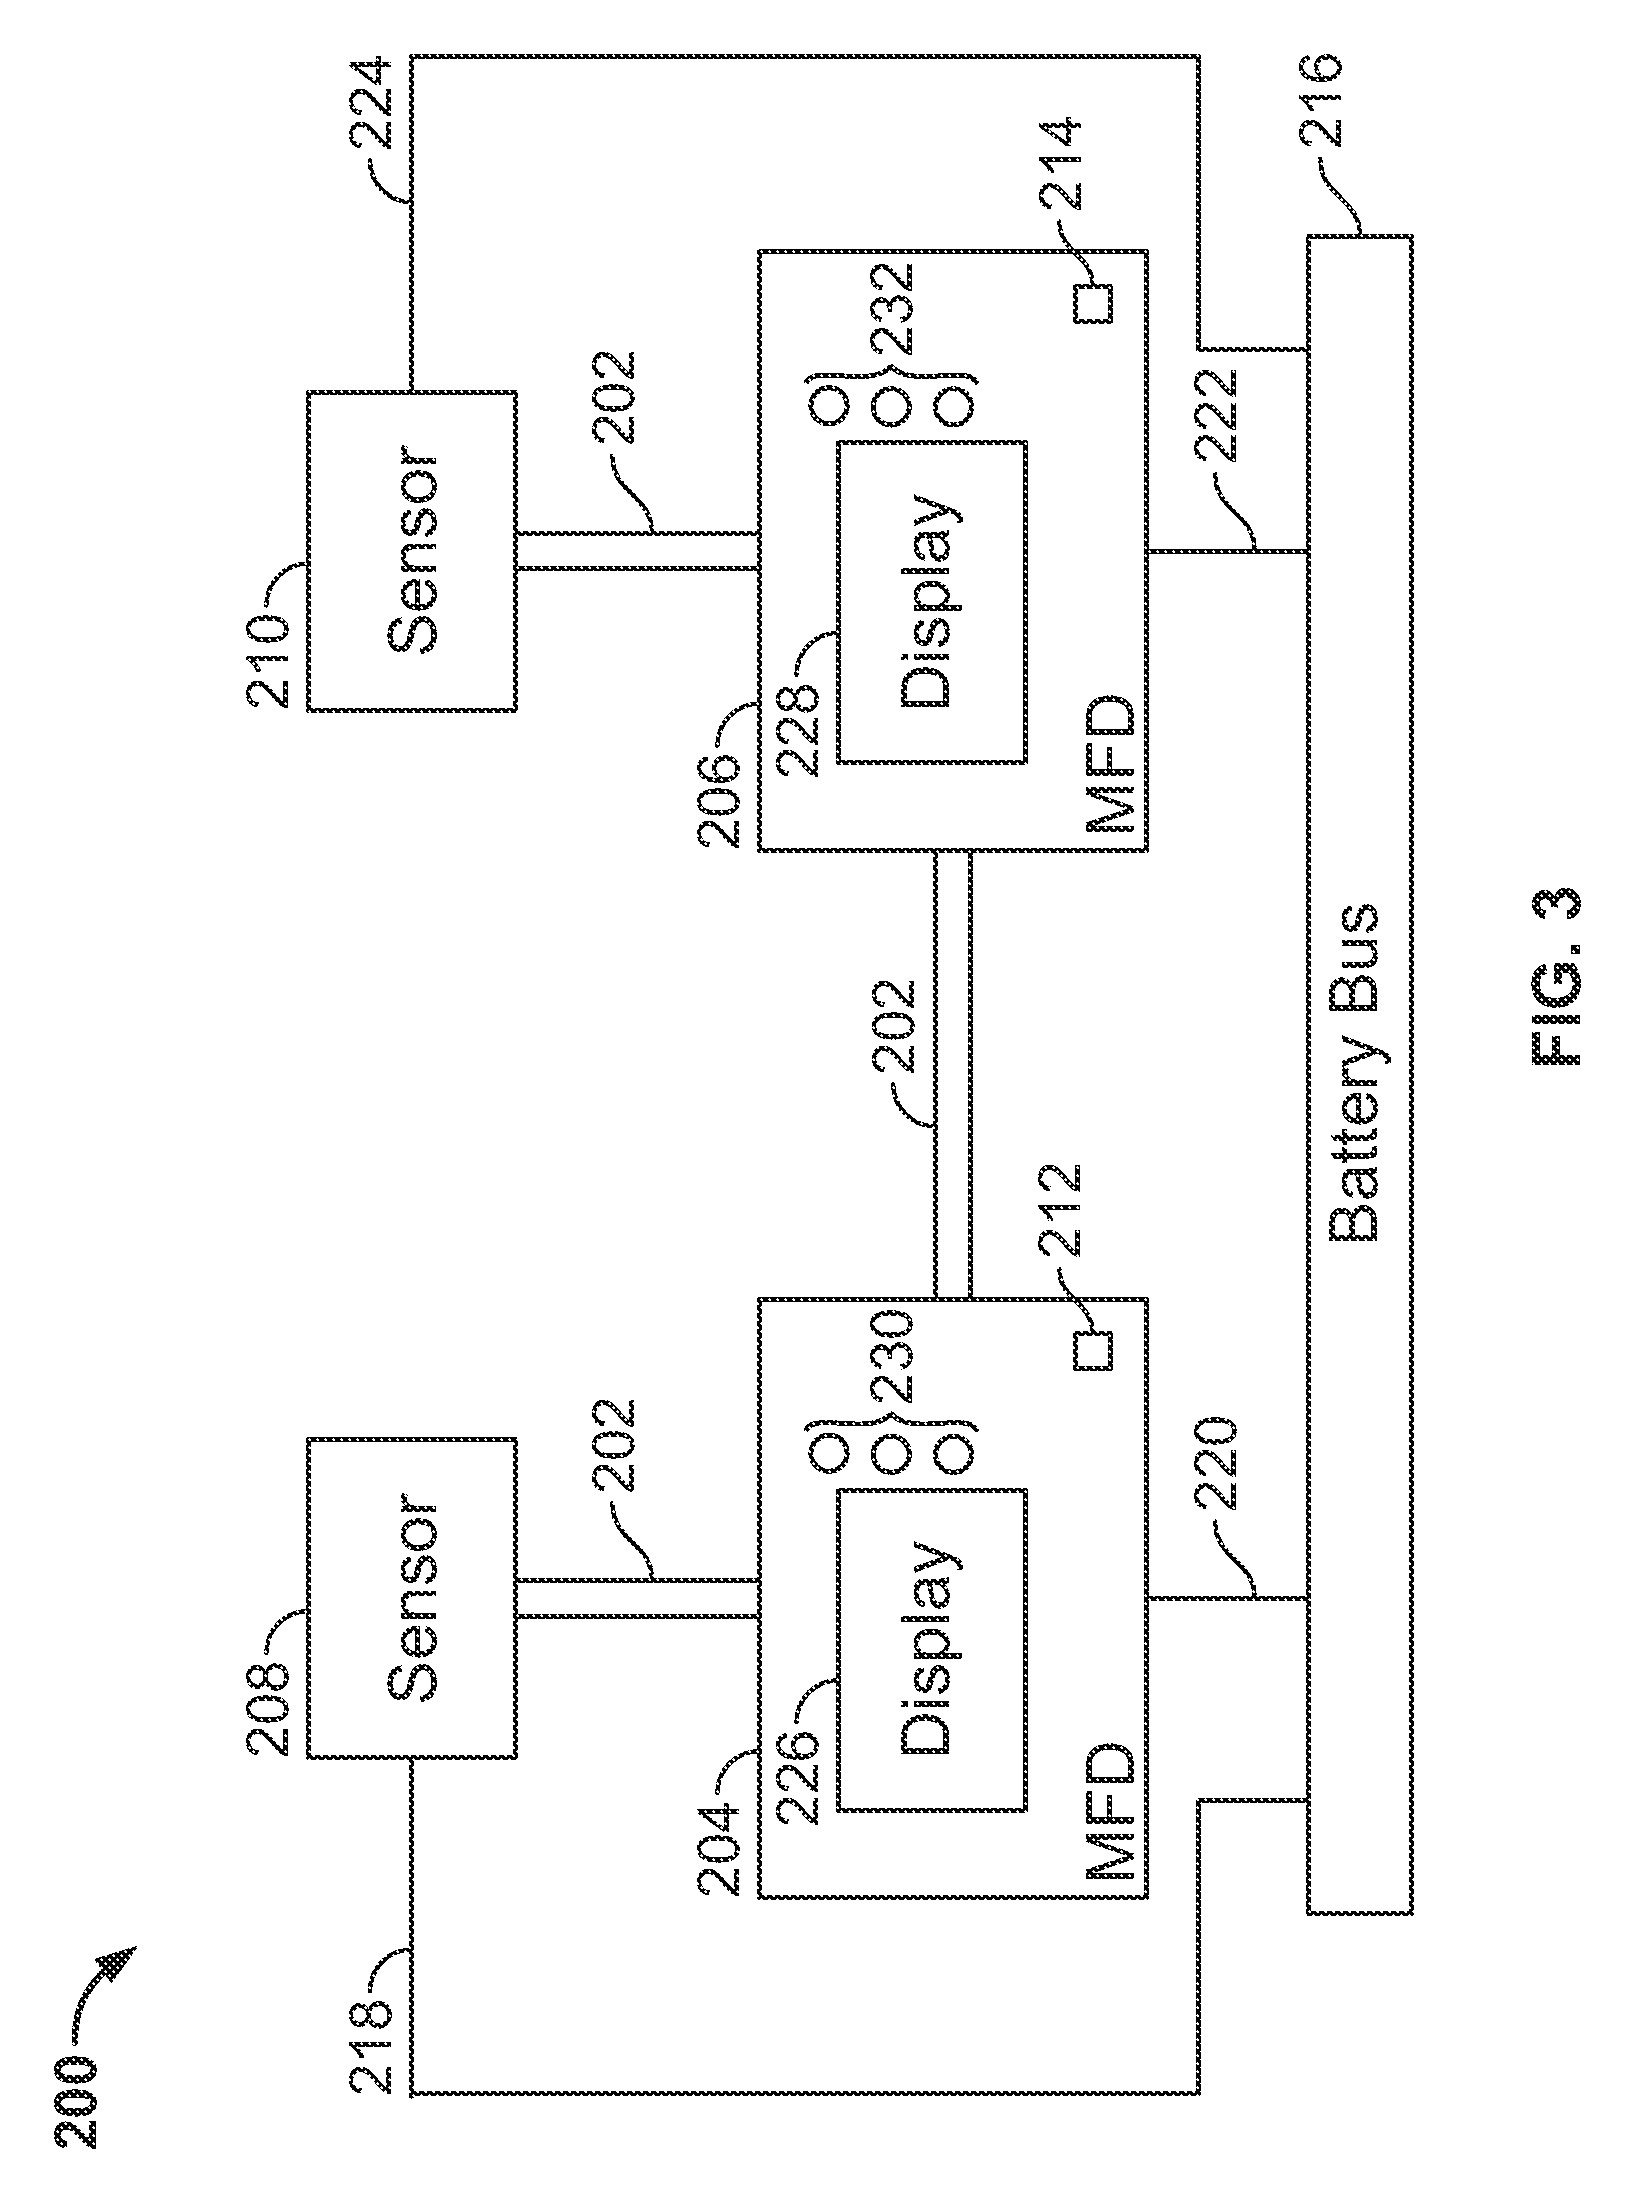 Method and apparatus for remote device control using control signals superimposed over ethernet